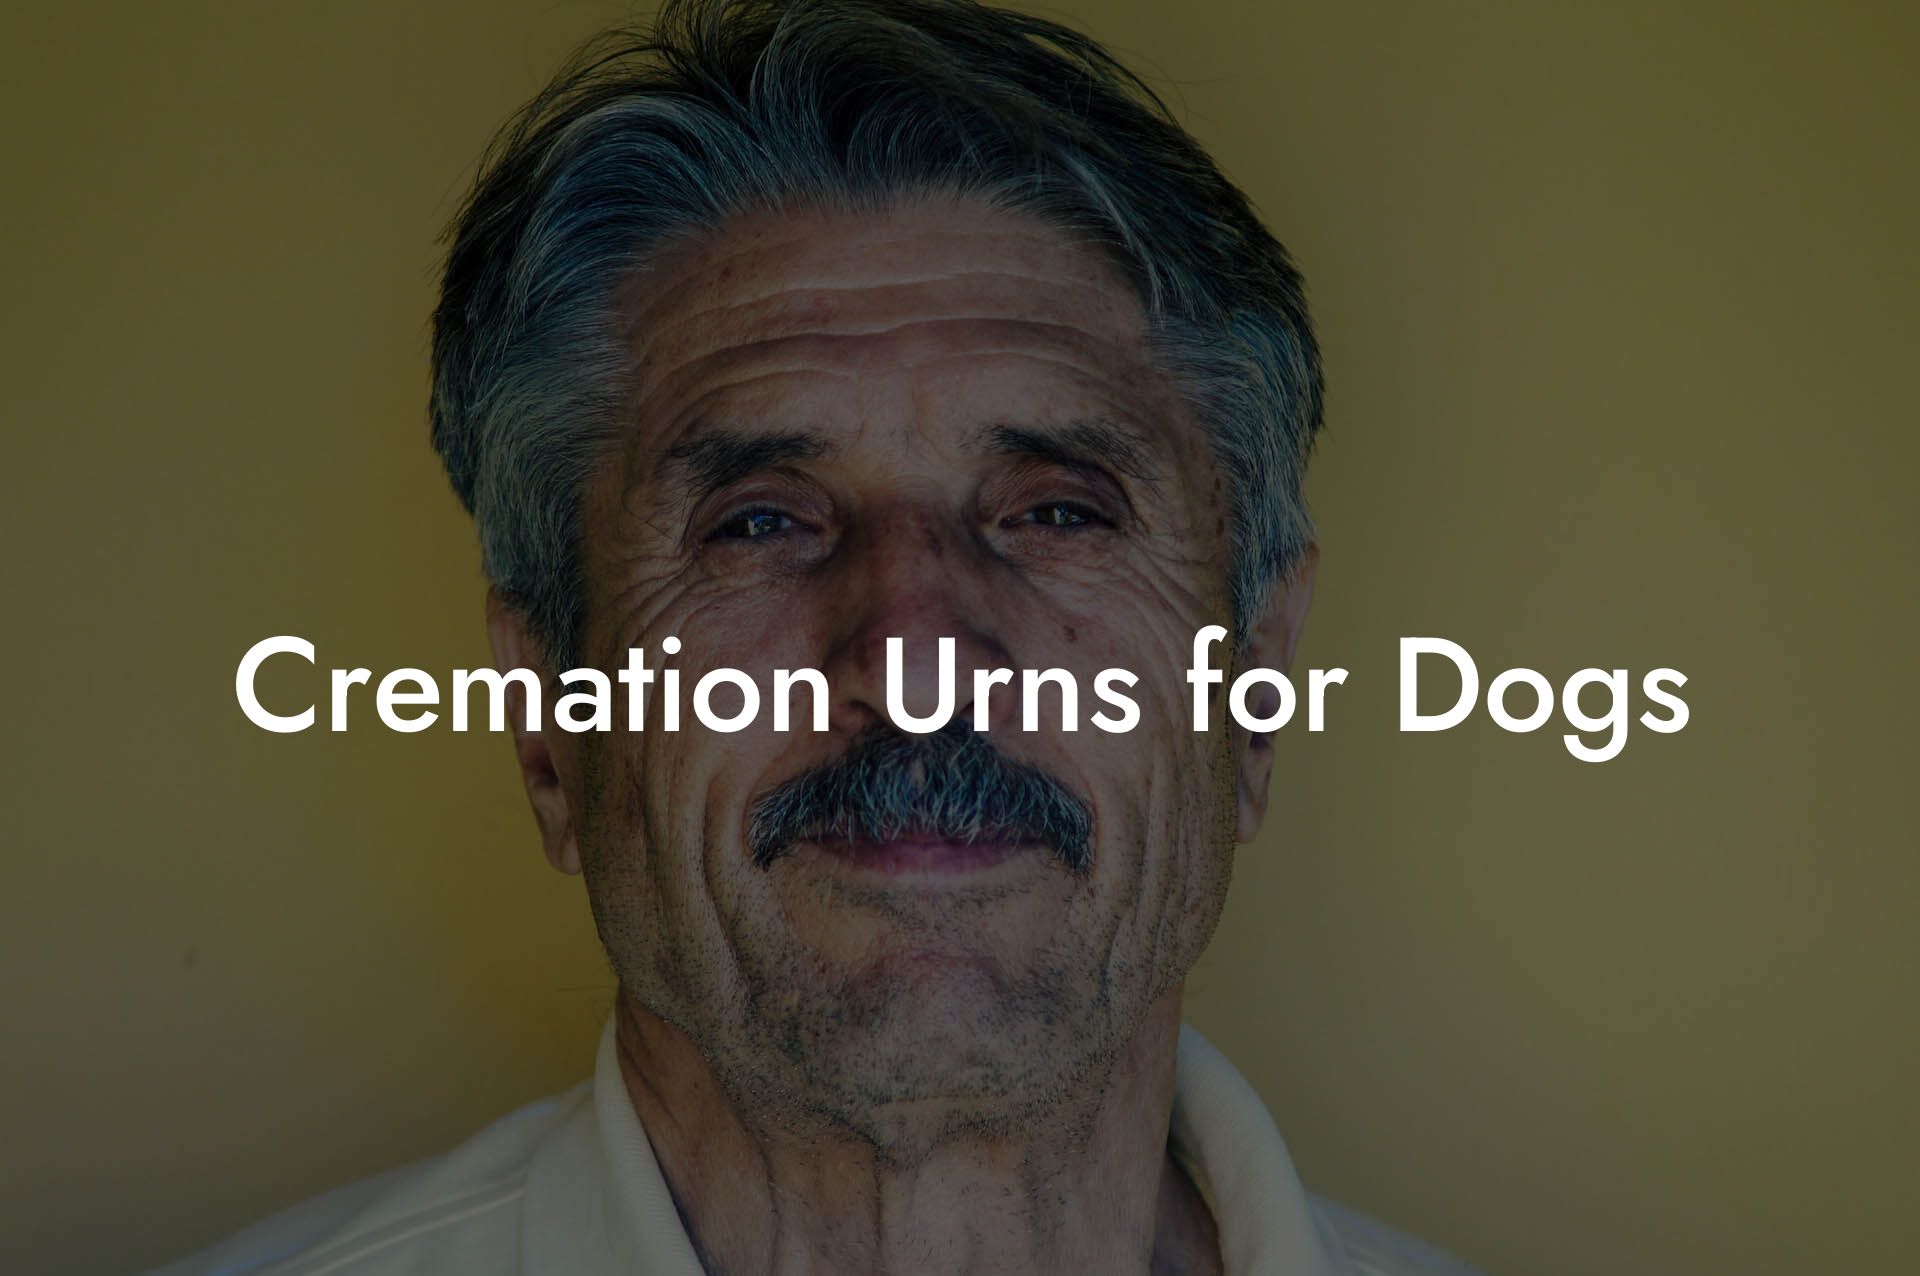 Cremation Urns for Dogs